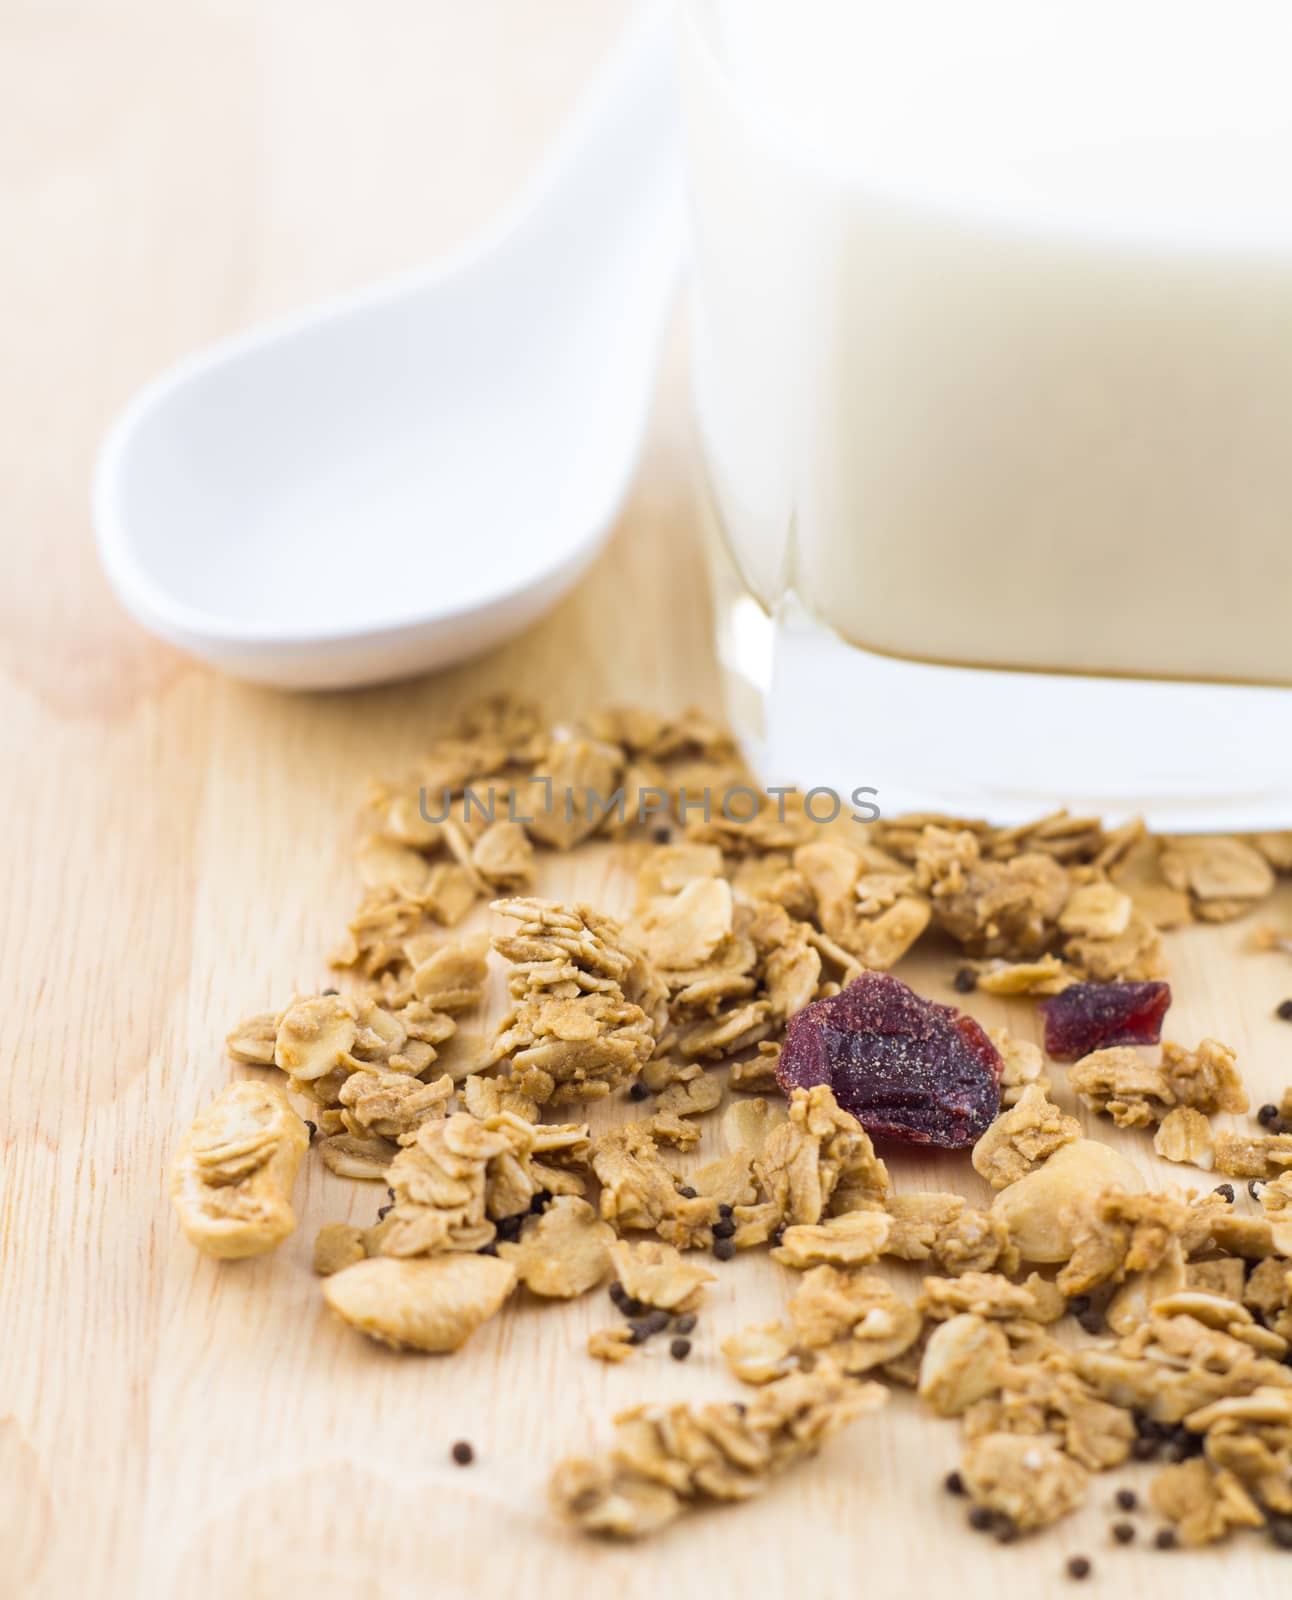 Fresh milk and cereal with spoon on wooden table